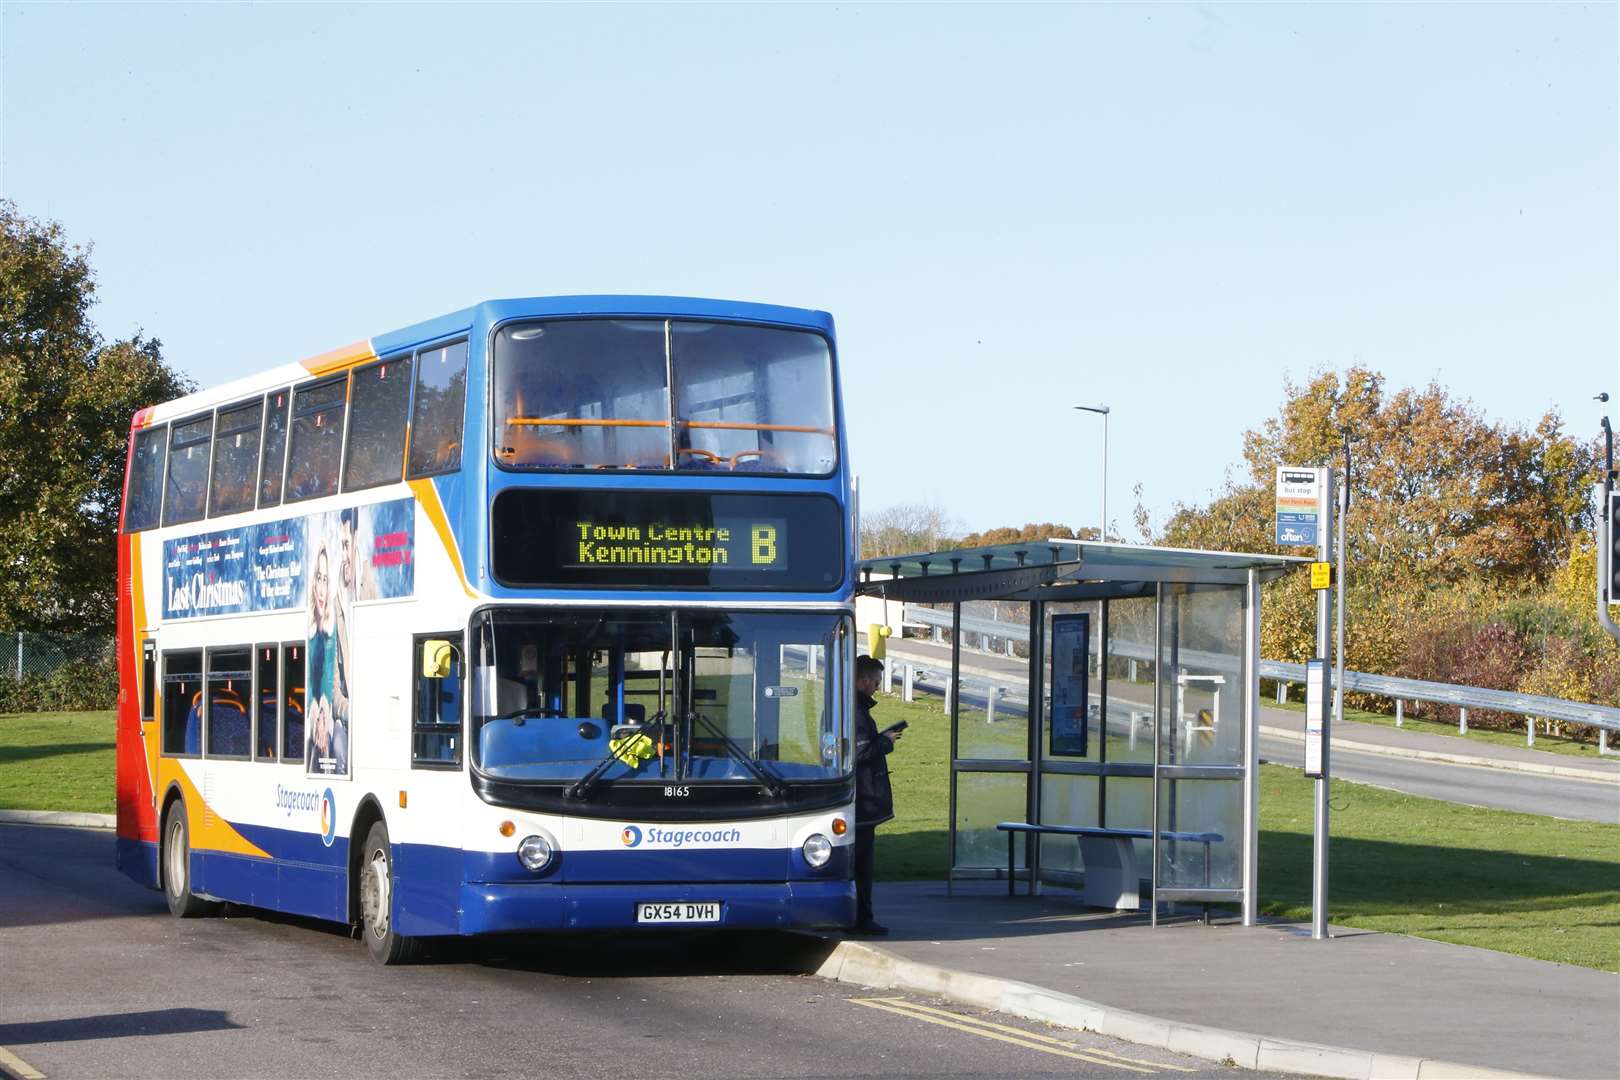 Stagecoach will return to normal service levels in the future